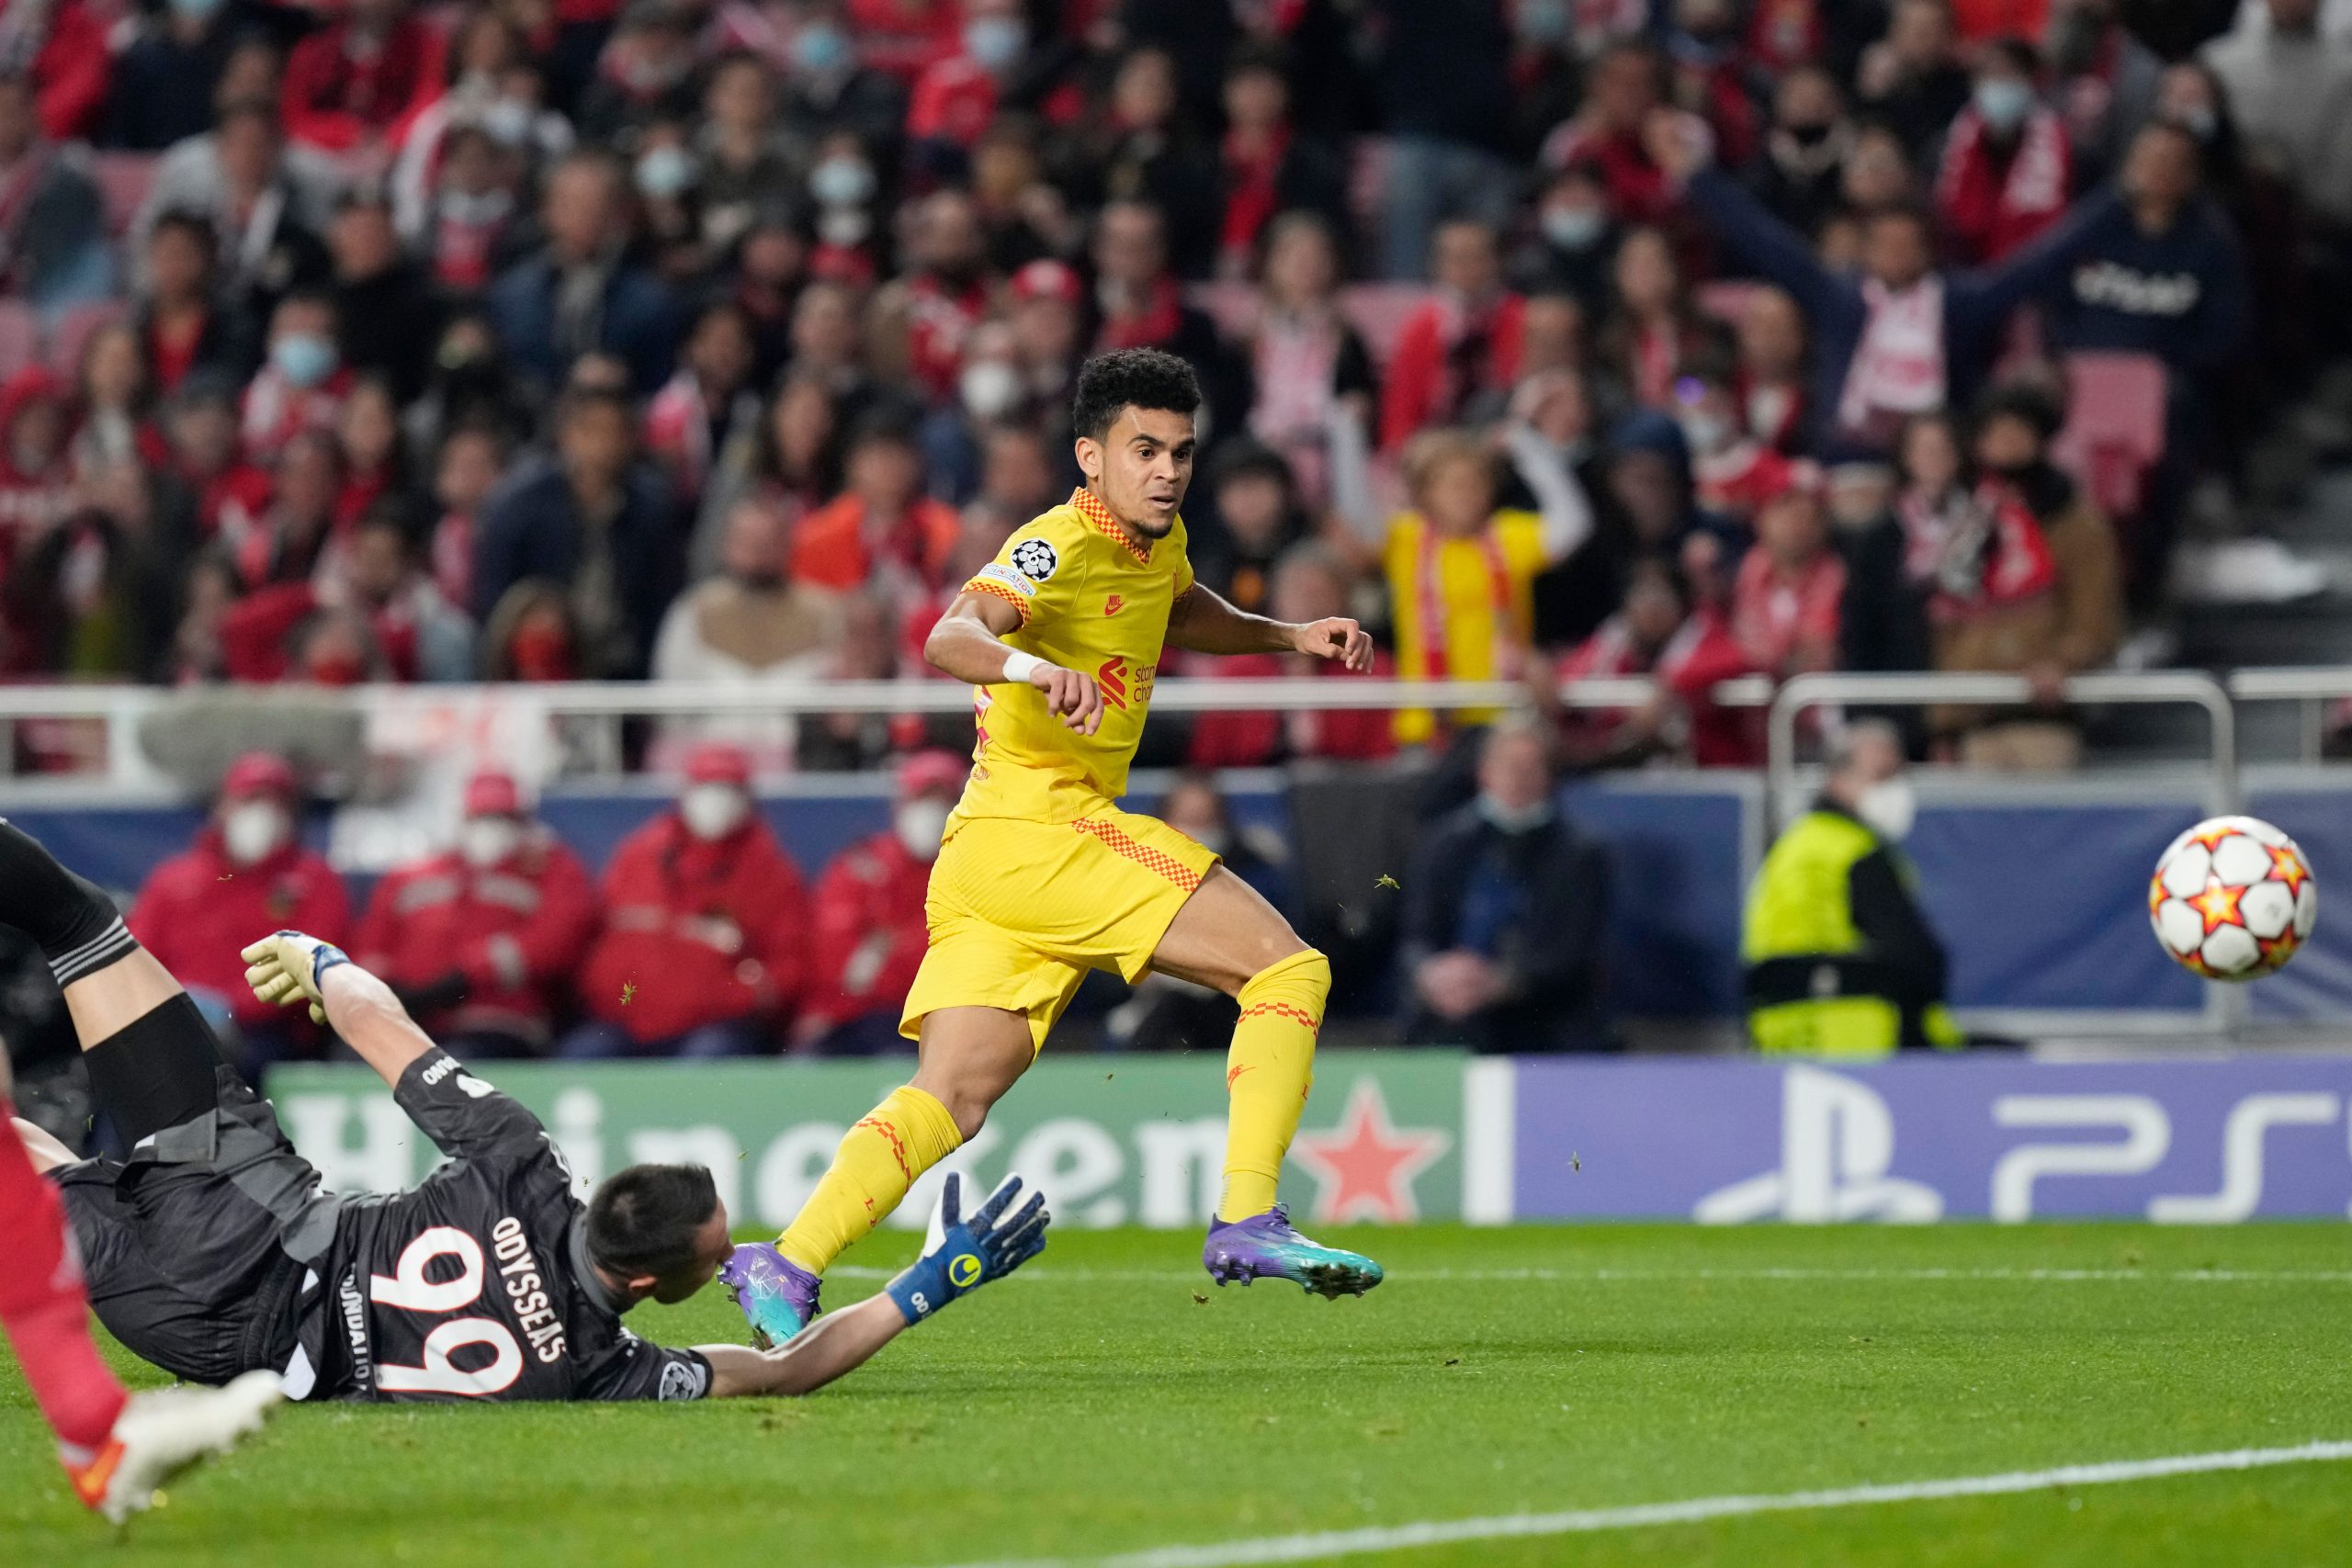 Champions League: Luis Diaz guides Liverpool to 3-1 victory over Benfica in Portugal